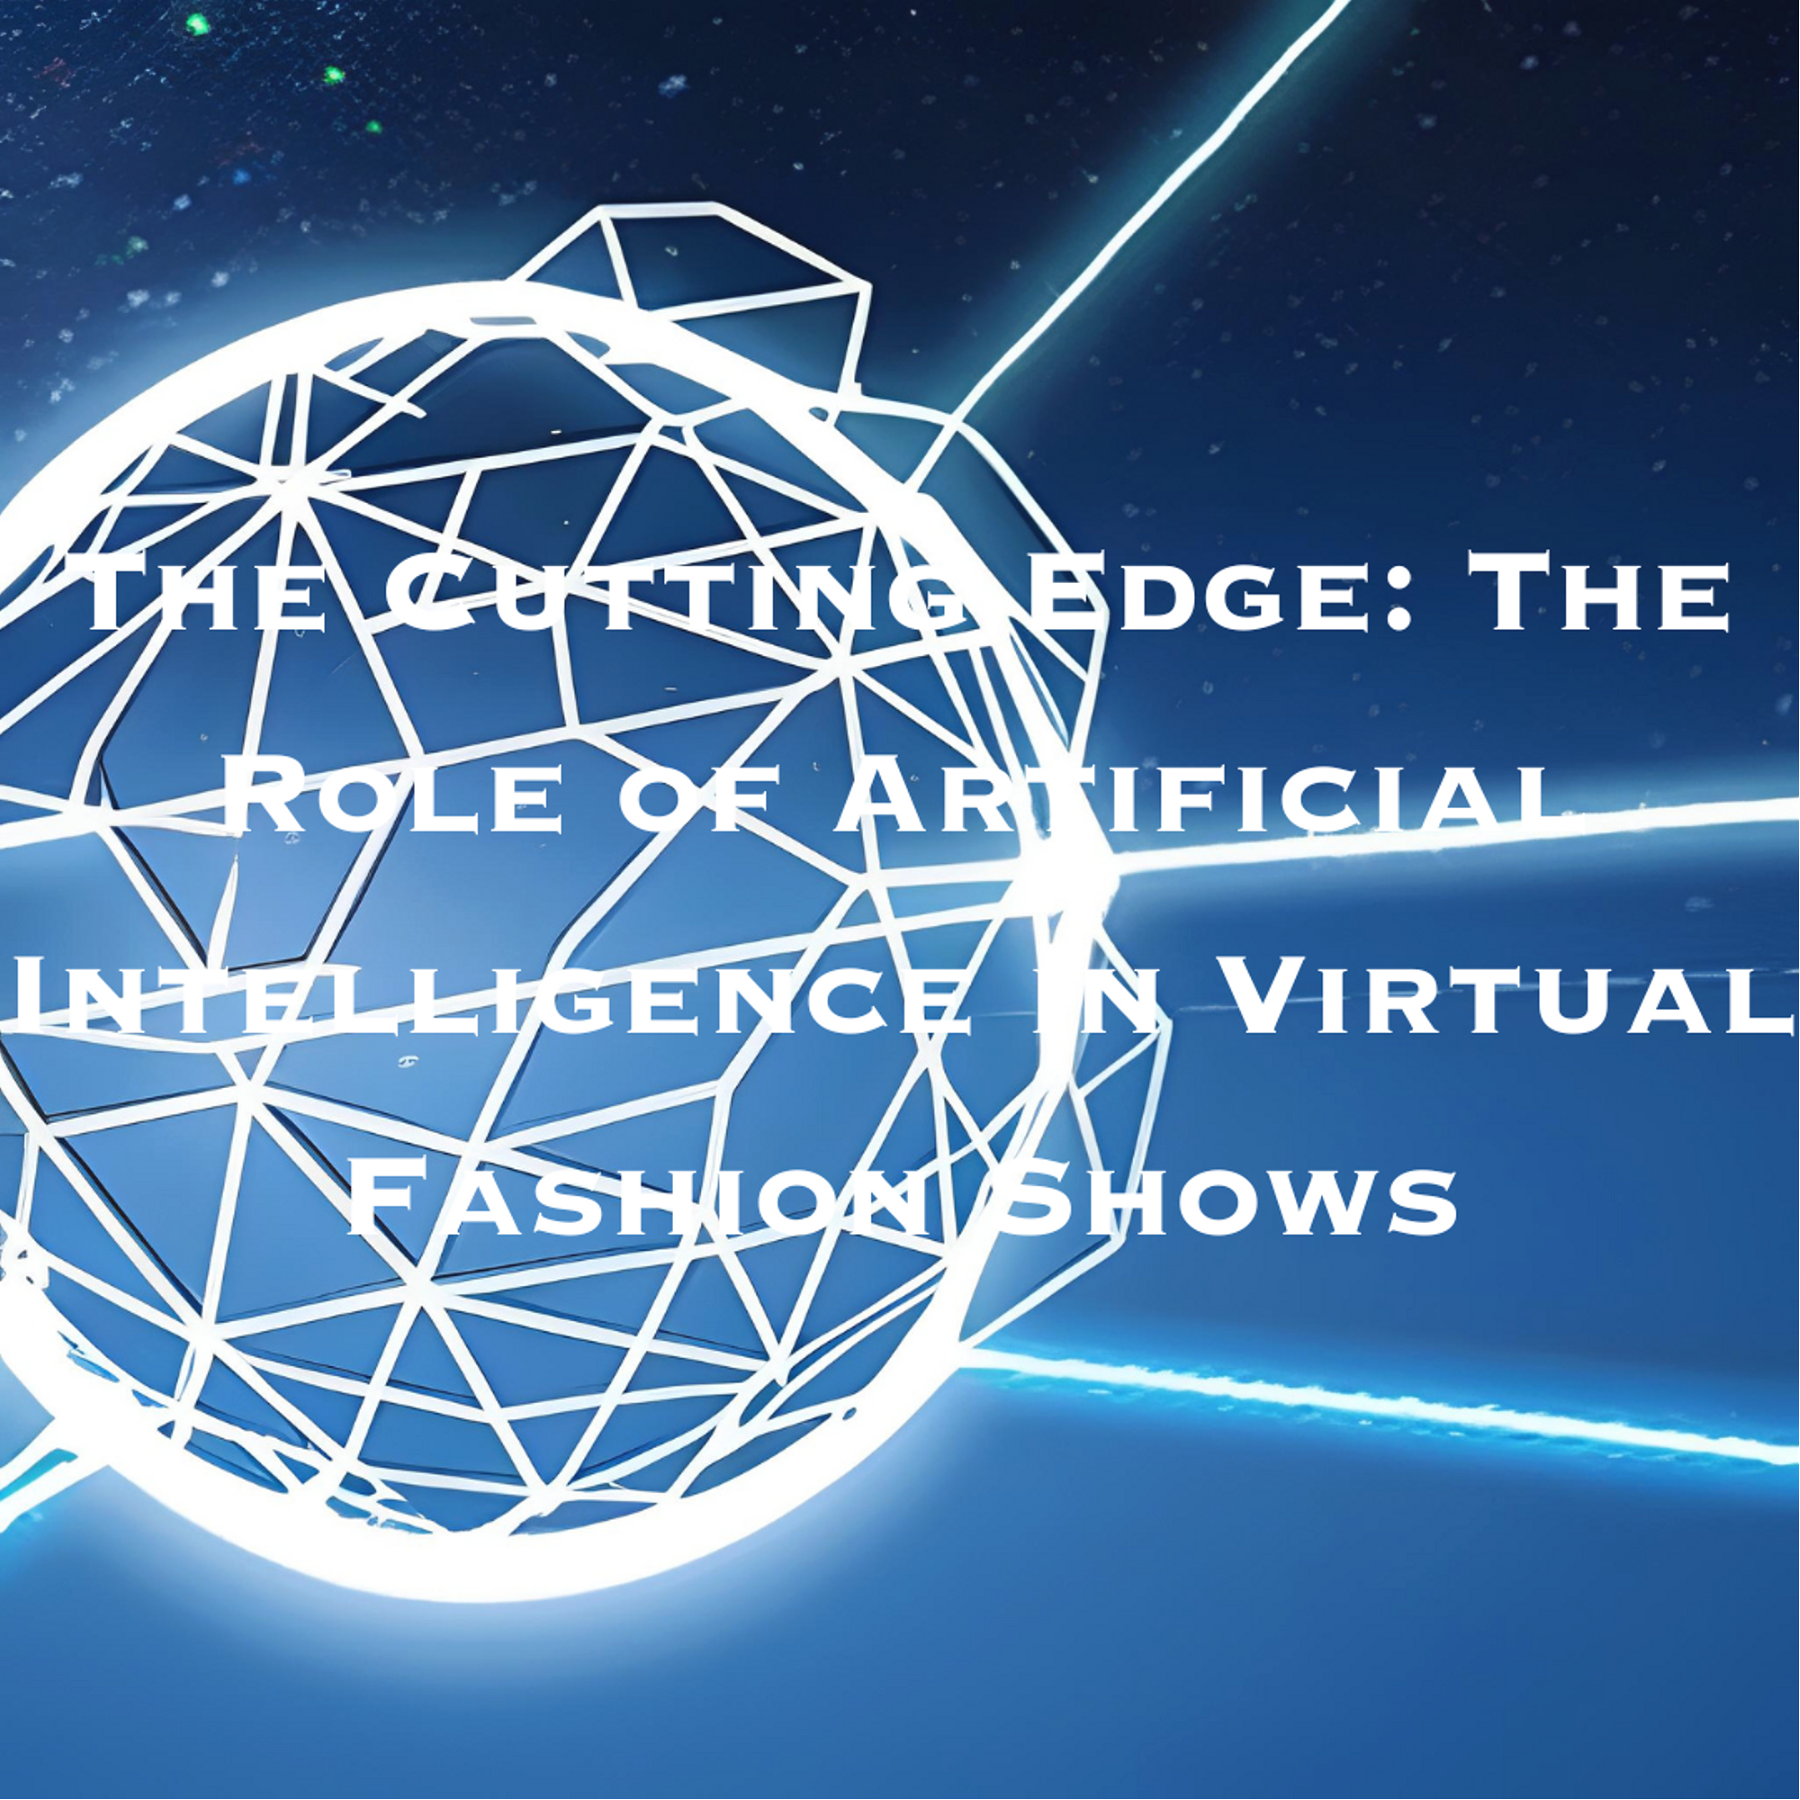 The Cutting Edge: The Role of Artificial Intelligence in Virtual Fashion Shows